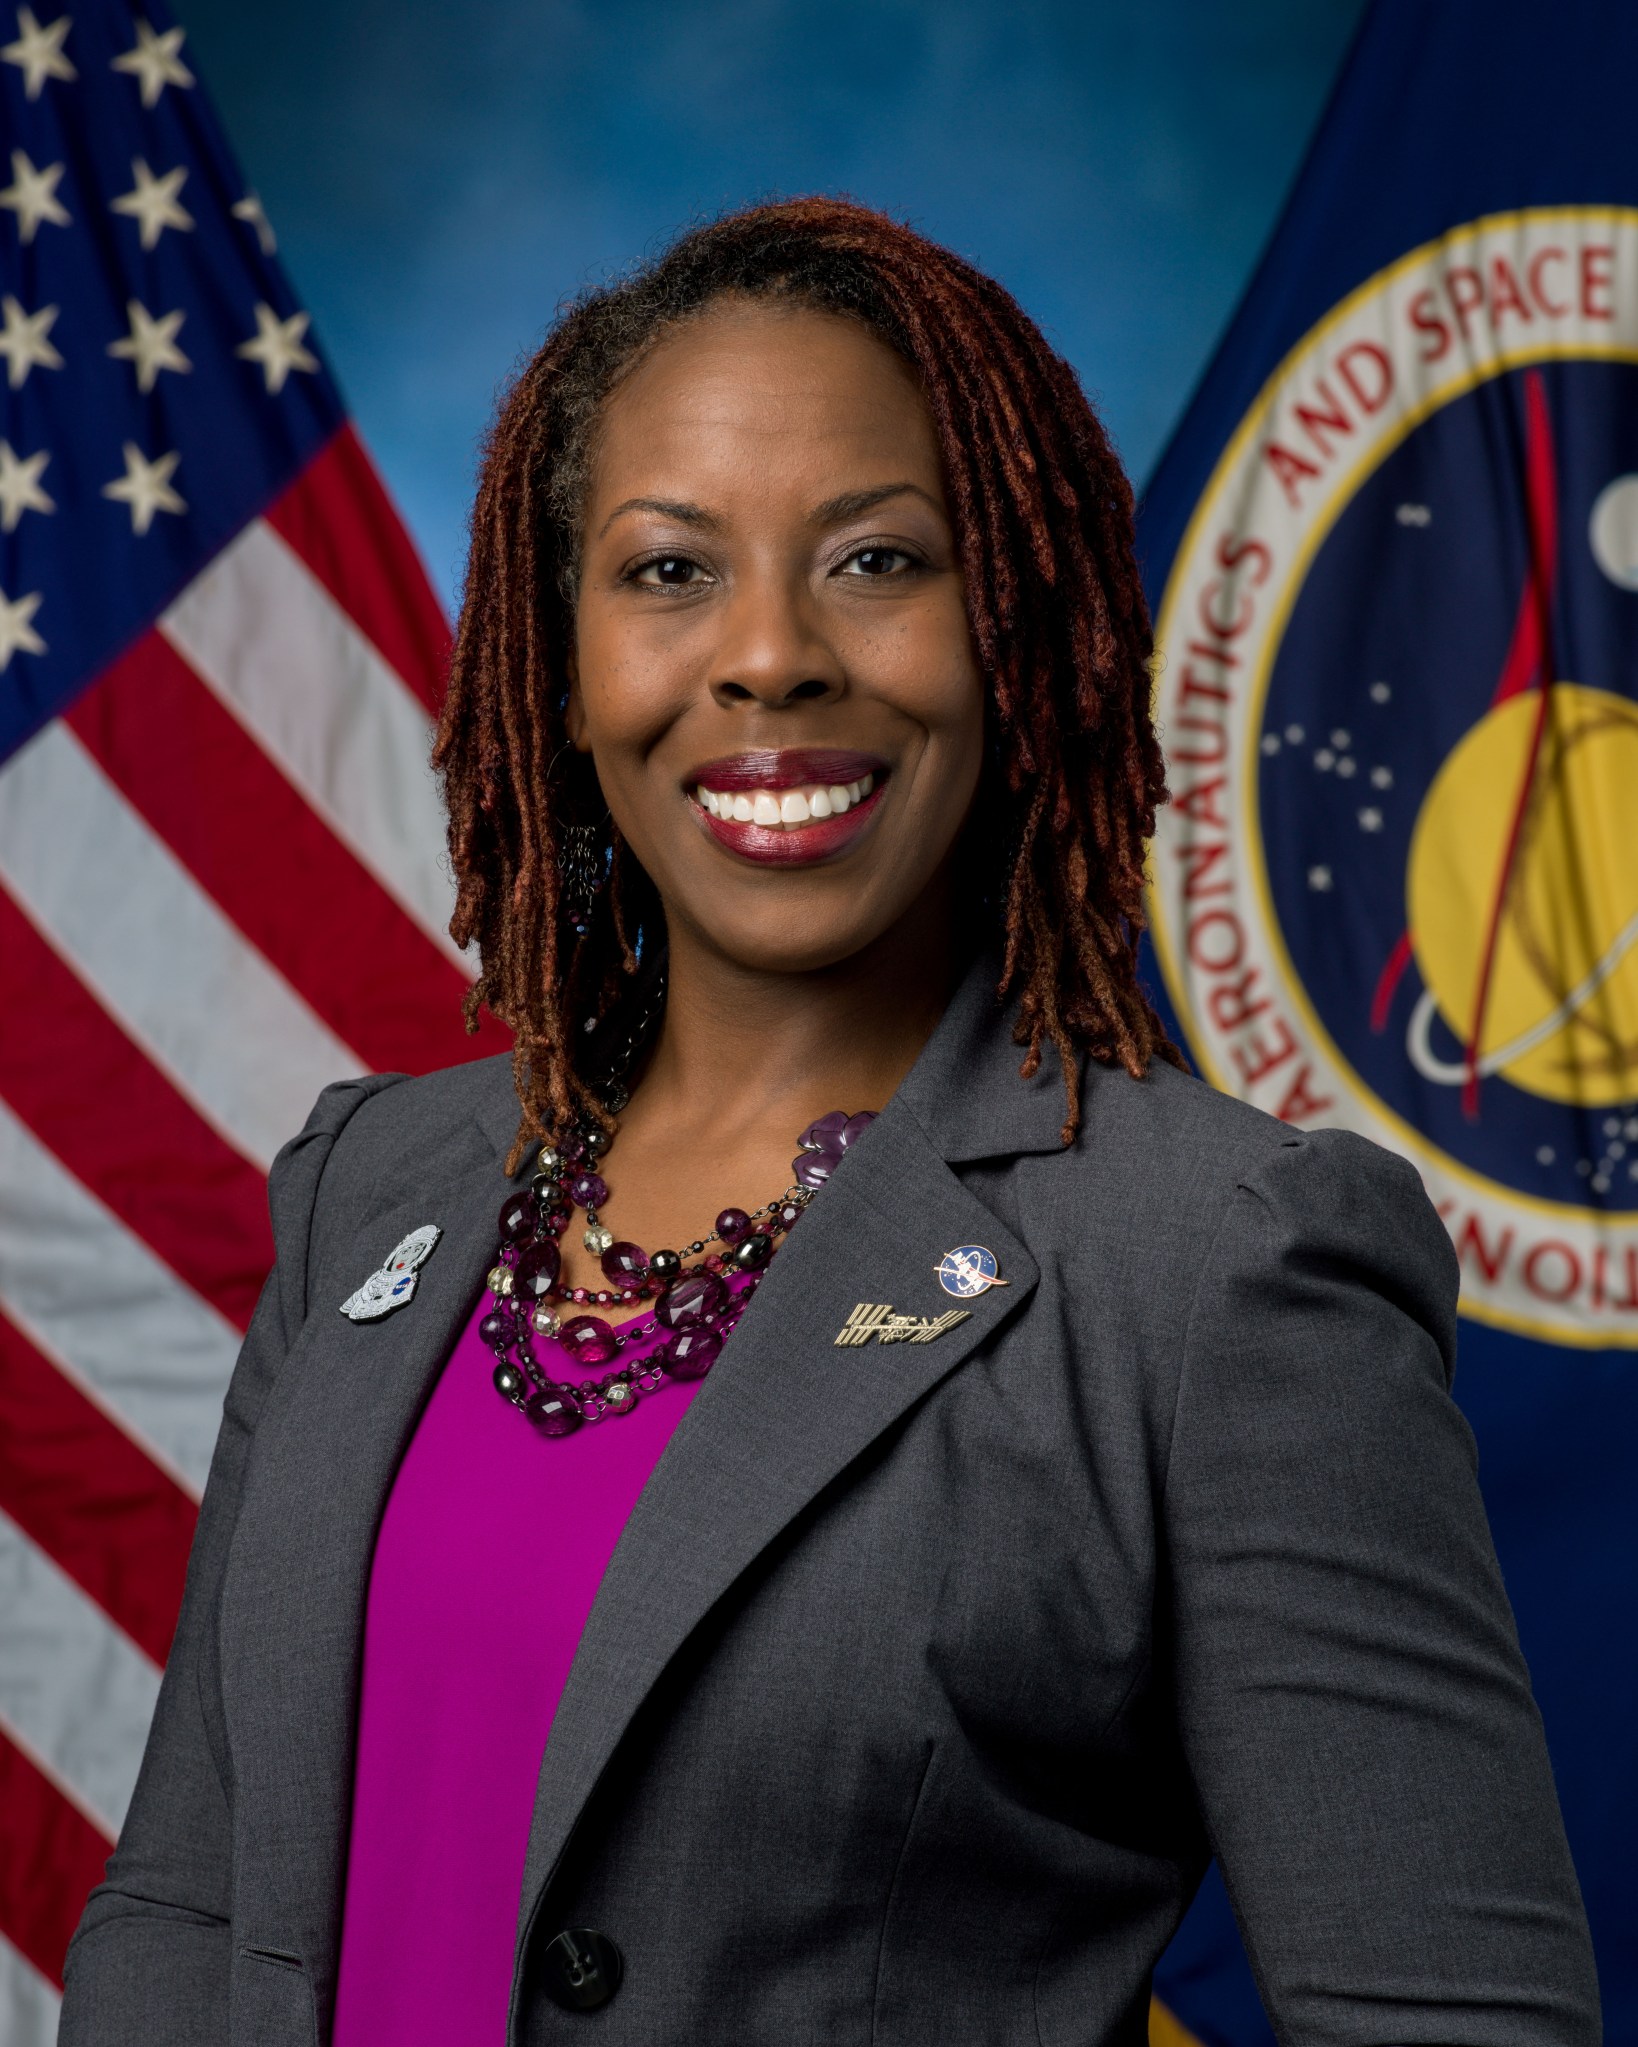 A woman wearing a grey blazer and a pink shirt smiles in front of a blue background with two flags behind her, a U.S. flag on the left and a NASA flag on the right.